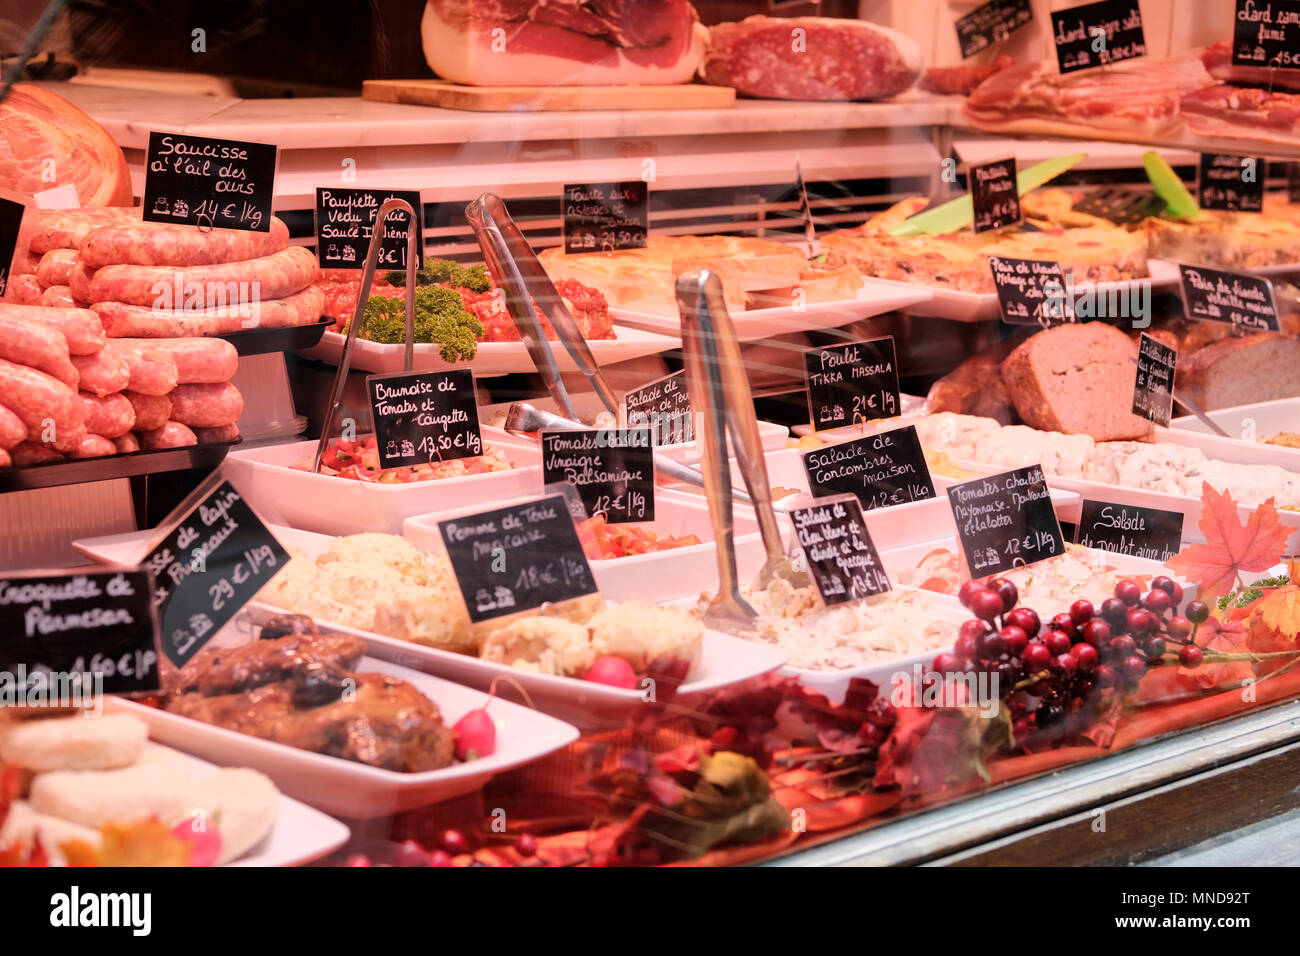 Meats and sausages inside a butchery in Liege, Belgium Stock Photo